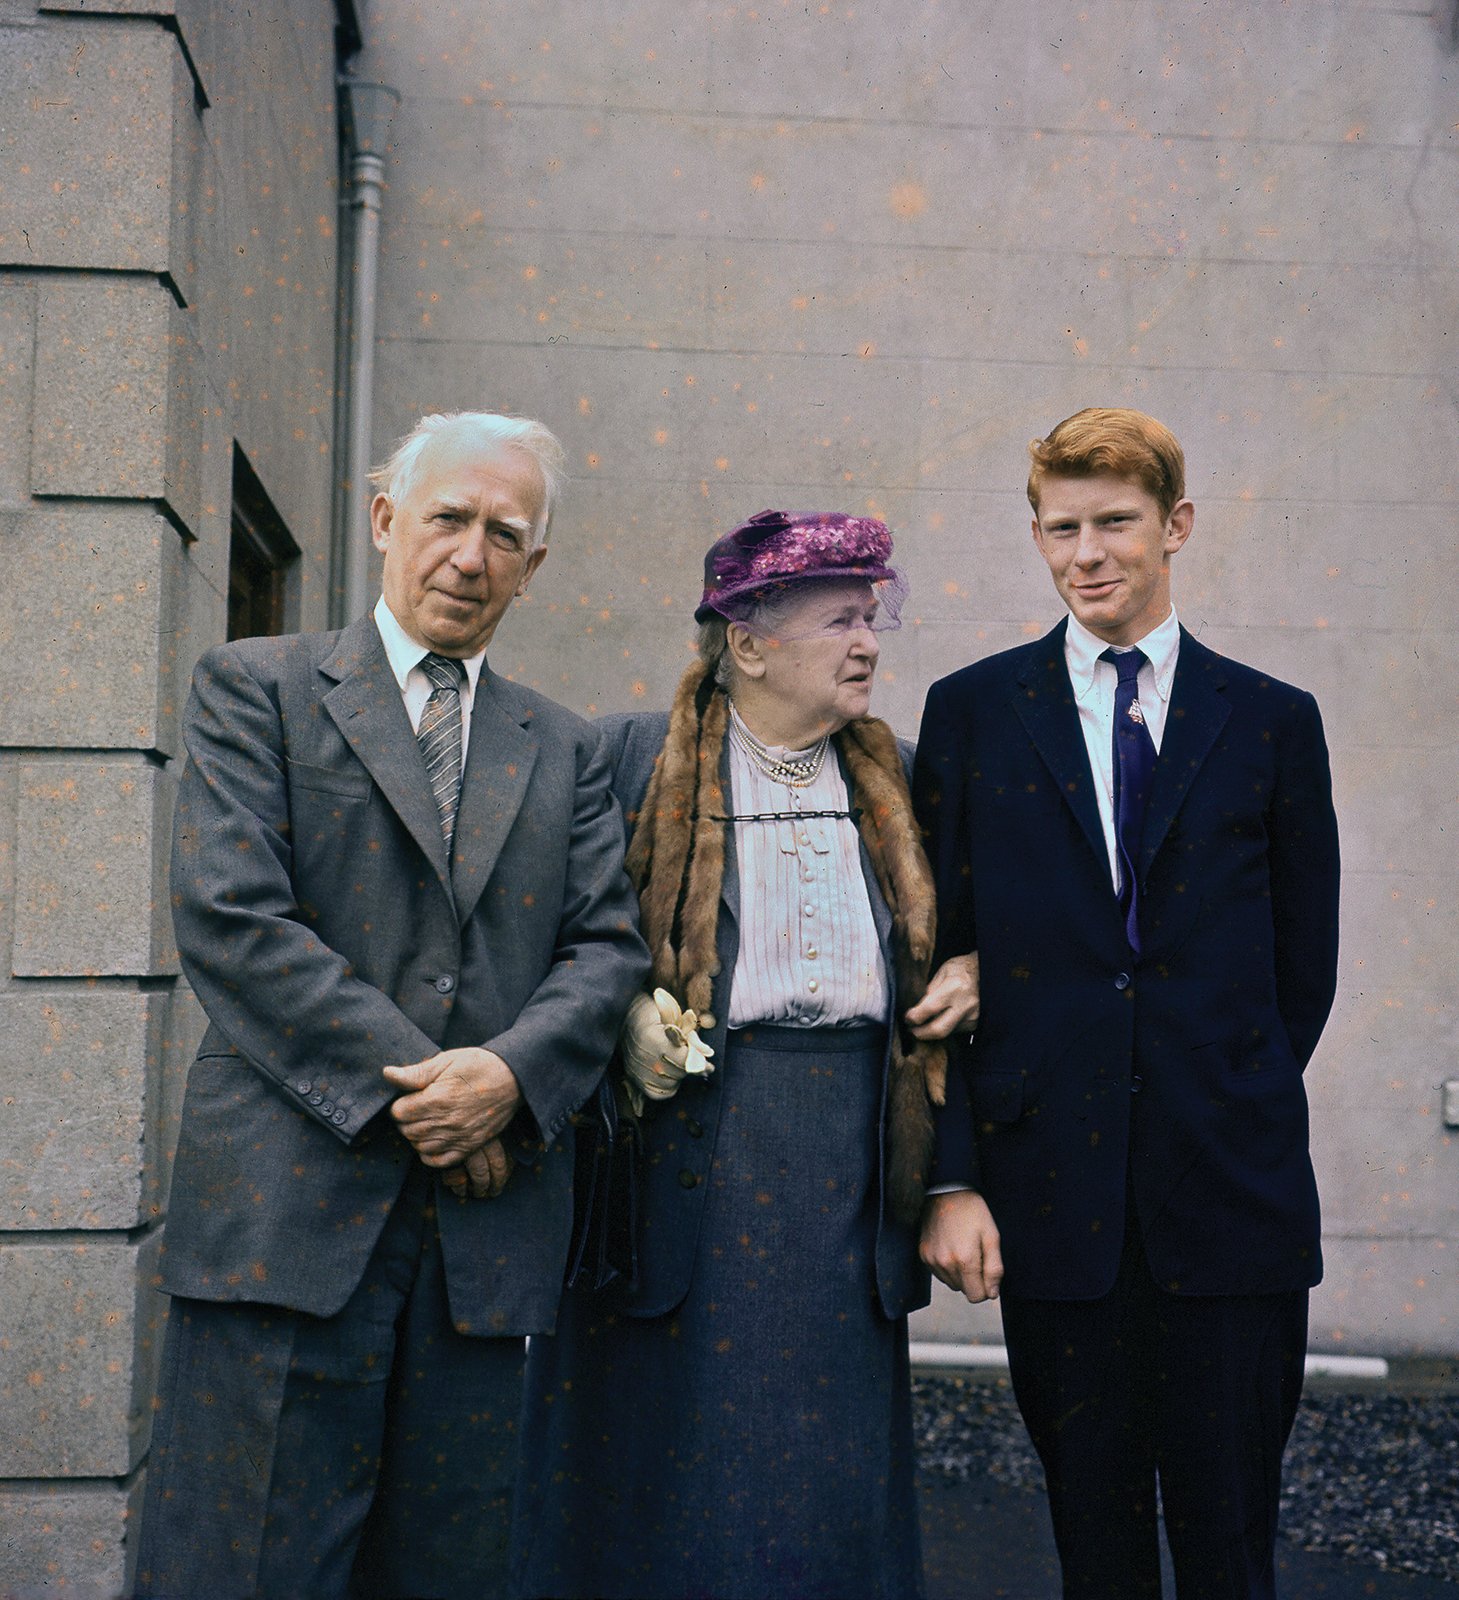 Peadar O’Donnell, Marion Malley and her grandson Cormac O’Malley, Dublin 1959.